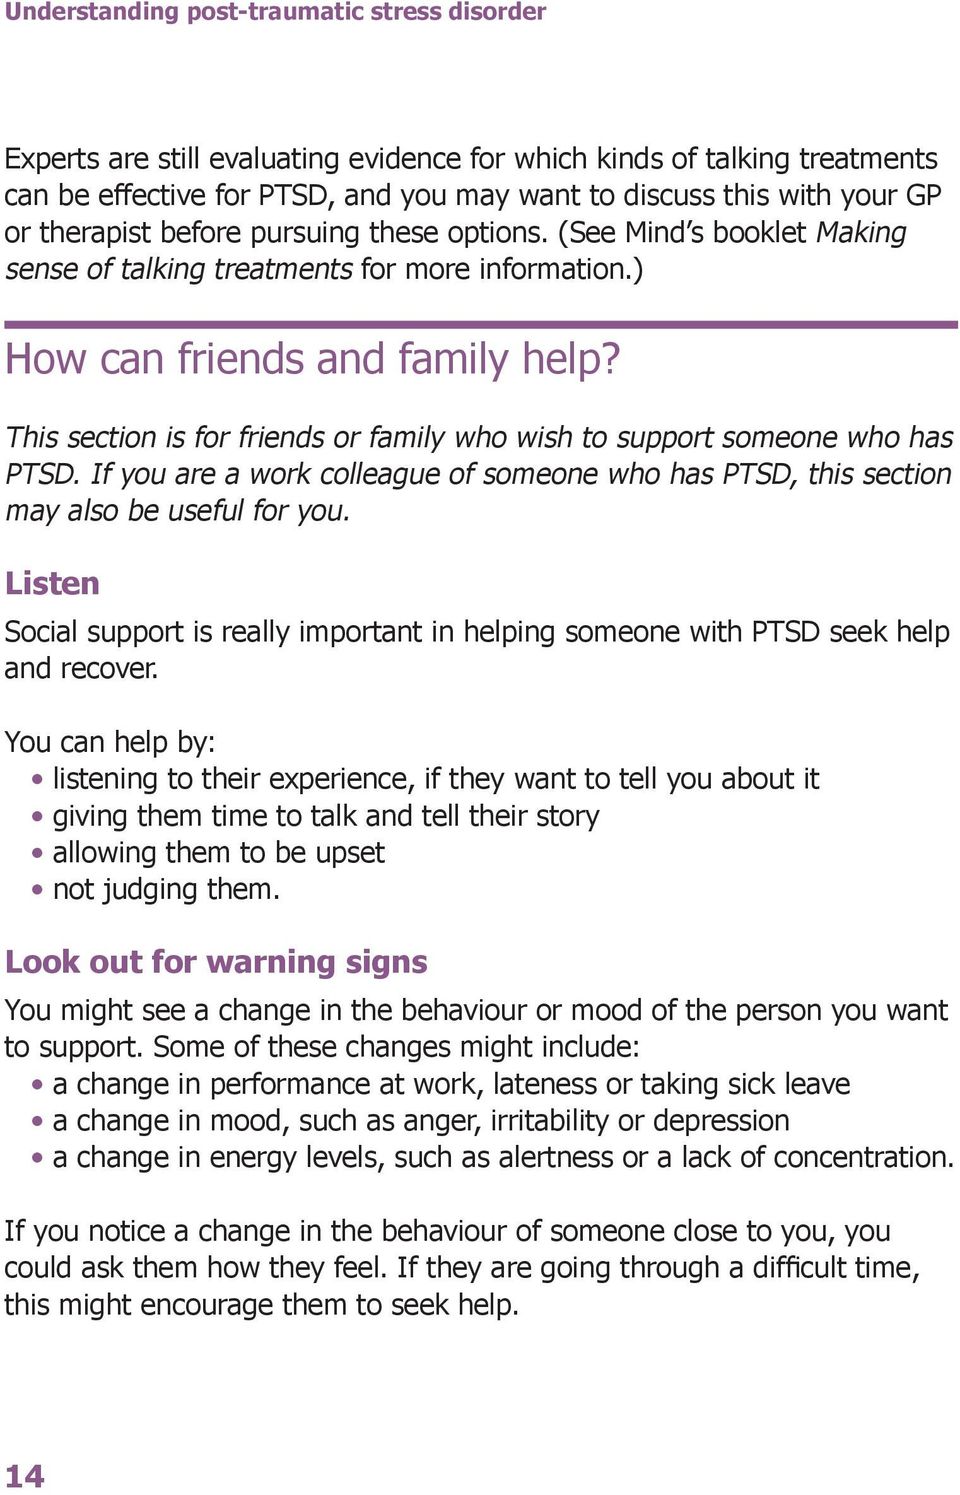 This section is for friends or family who wish to support someone who has PTSD. If you are a work colleague of someone who has PTSD, this section may also be useful for you.